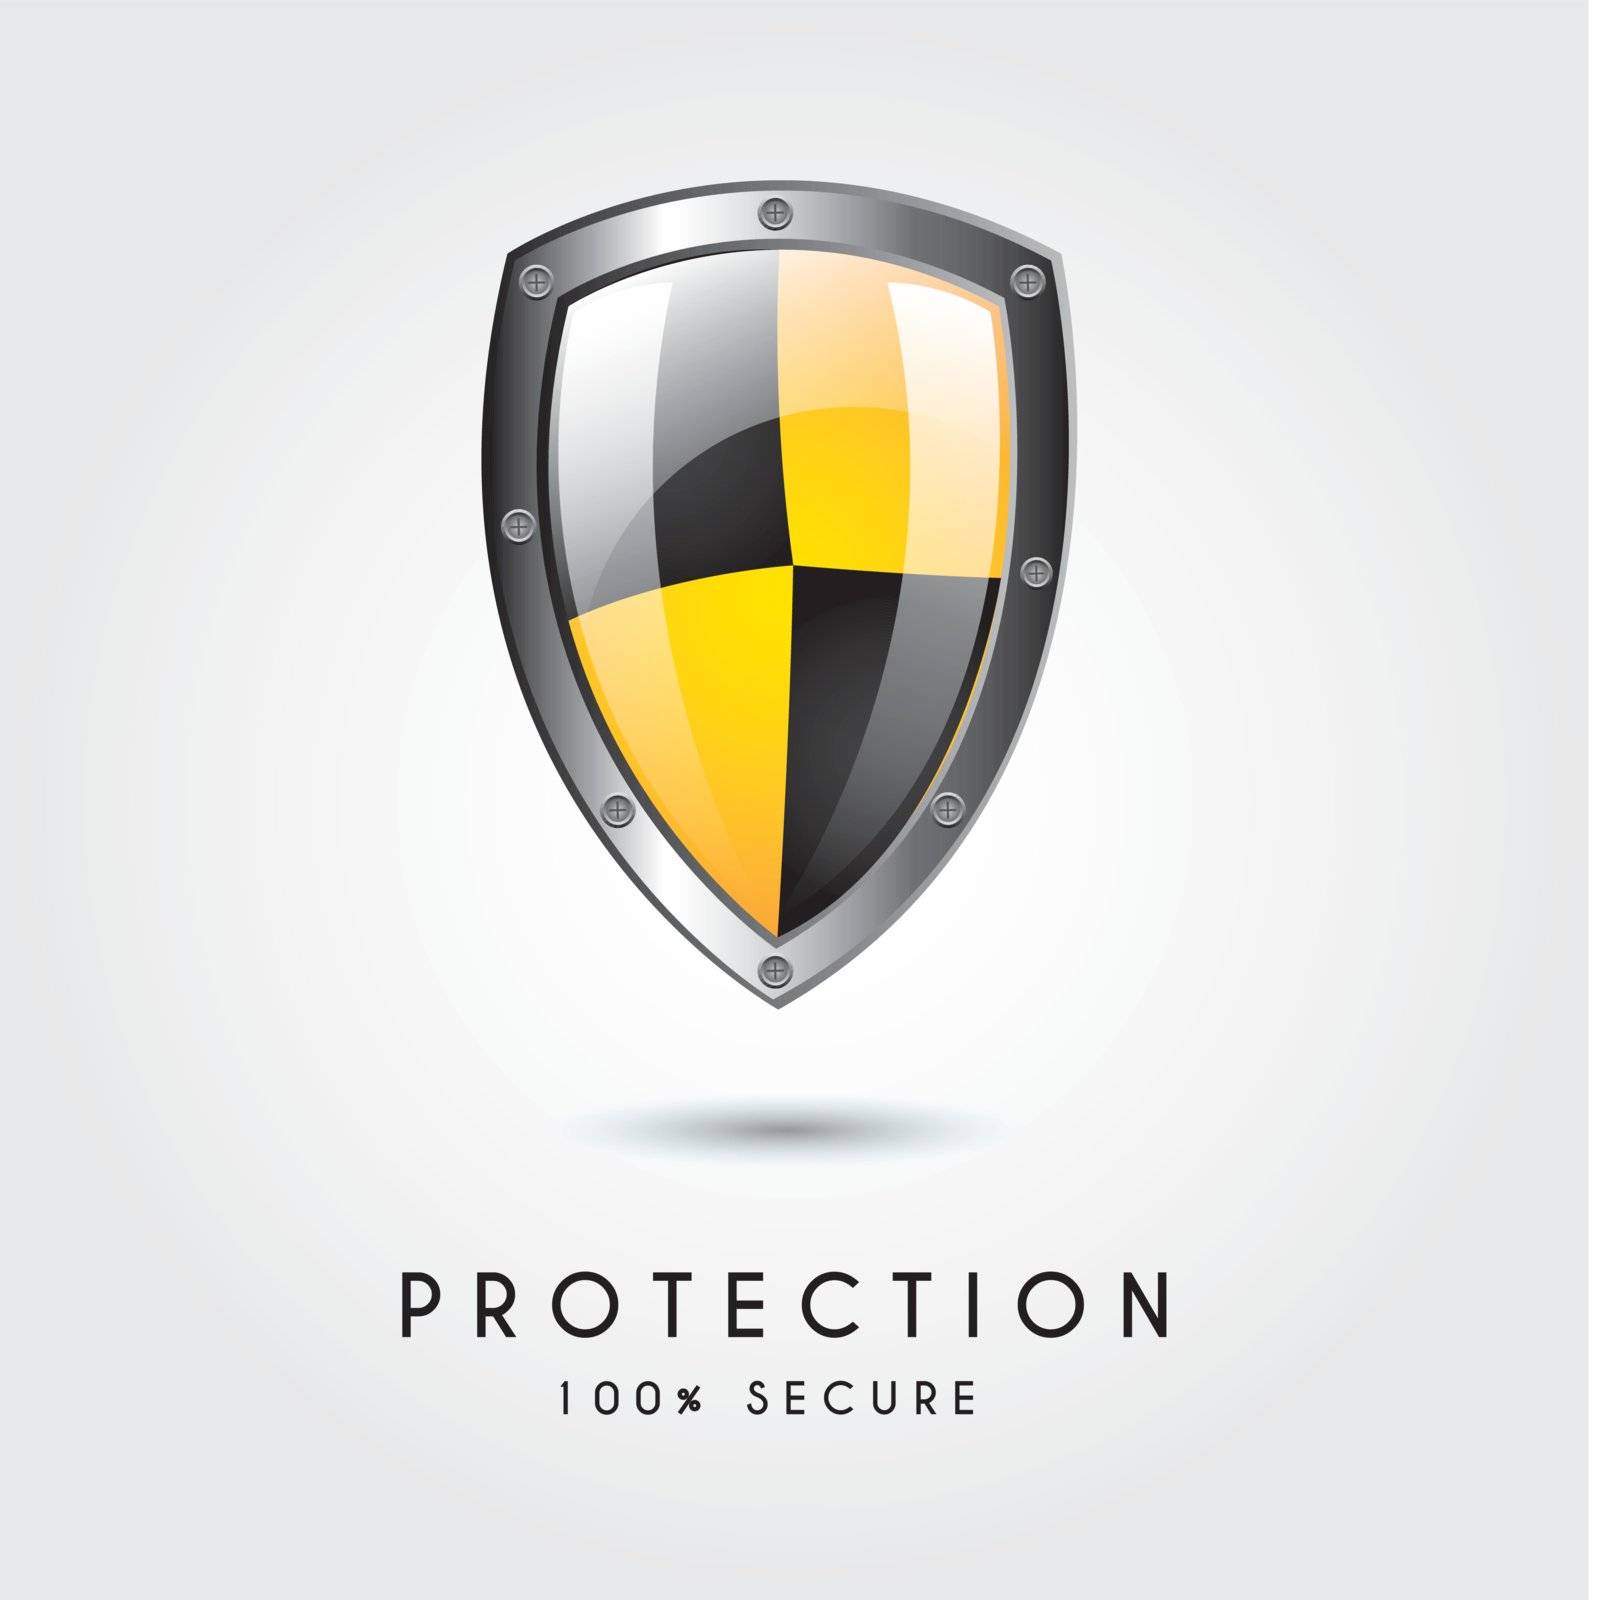 Protection icon over white background vector illustration